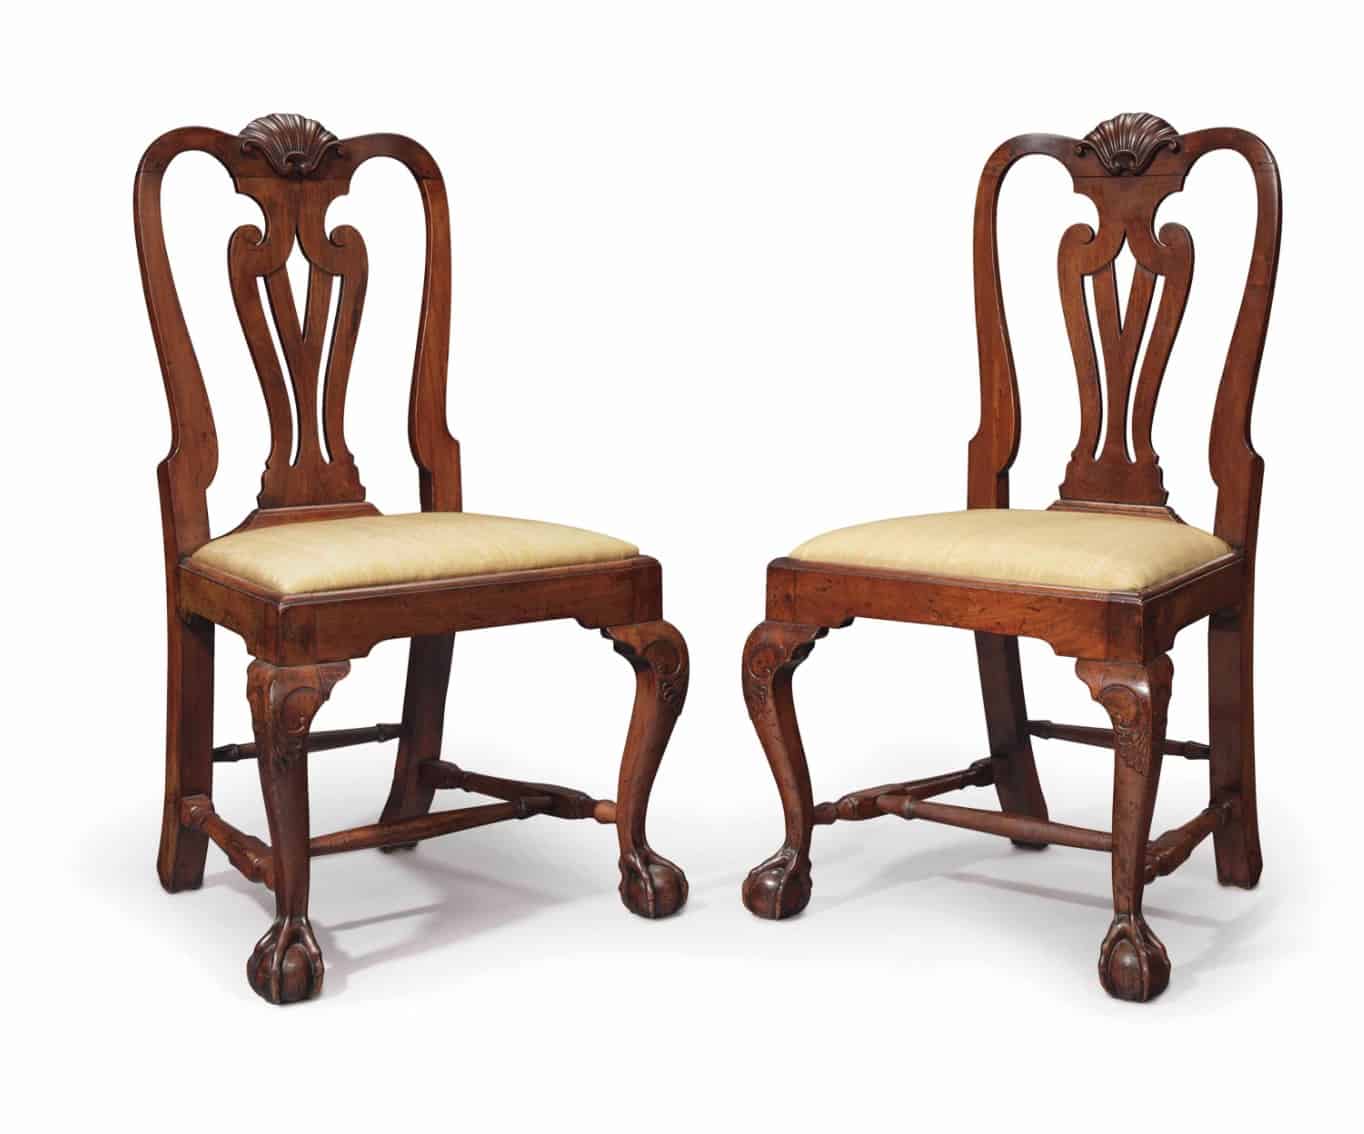 A Pair of Queen Anne Carved and Figured Mahogany Side Chairs – Circa. 1765